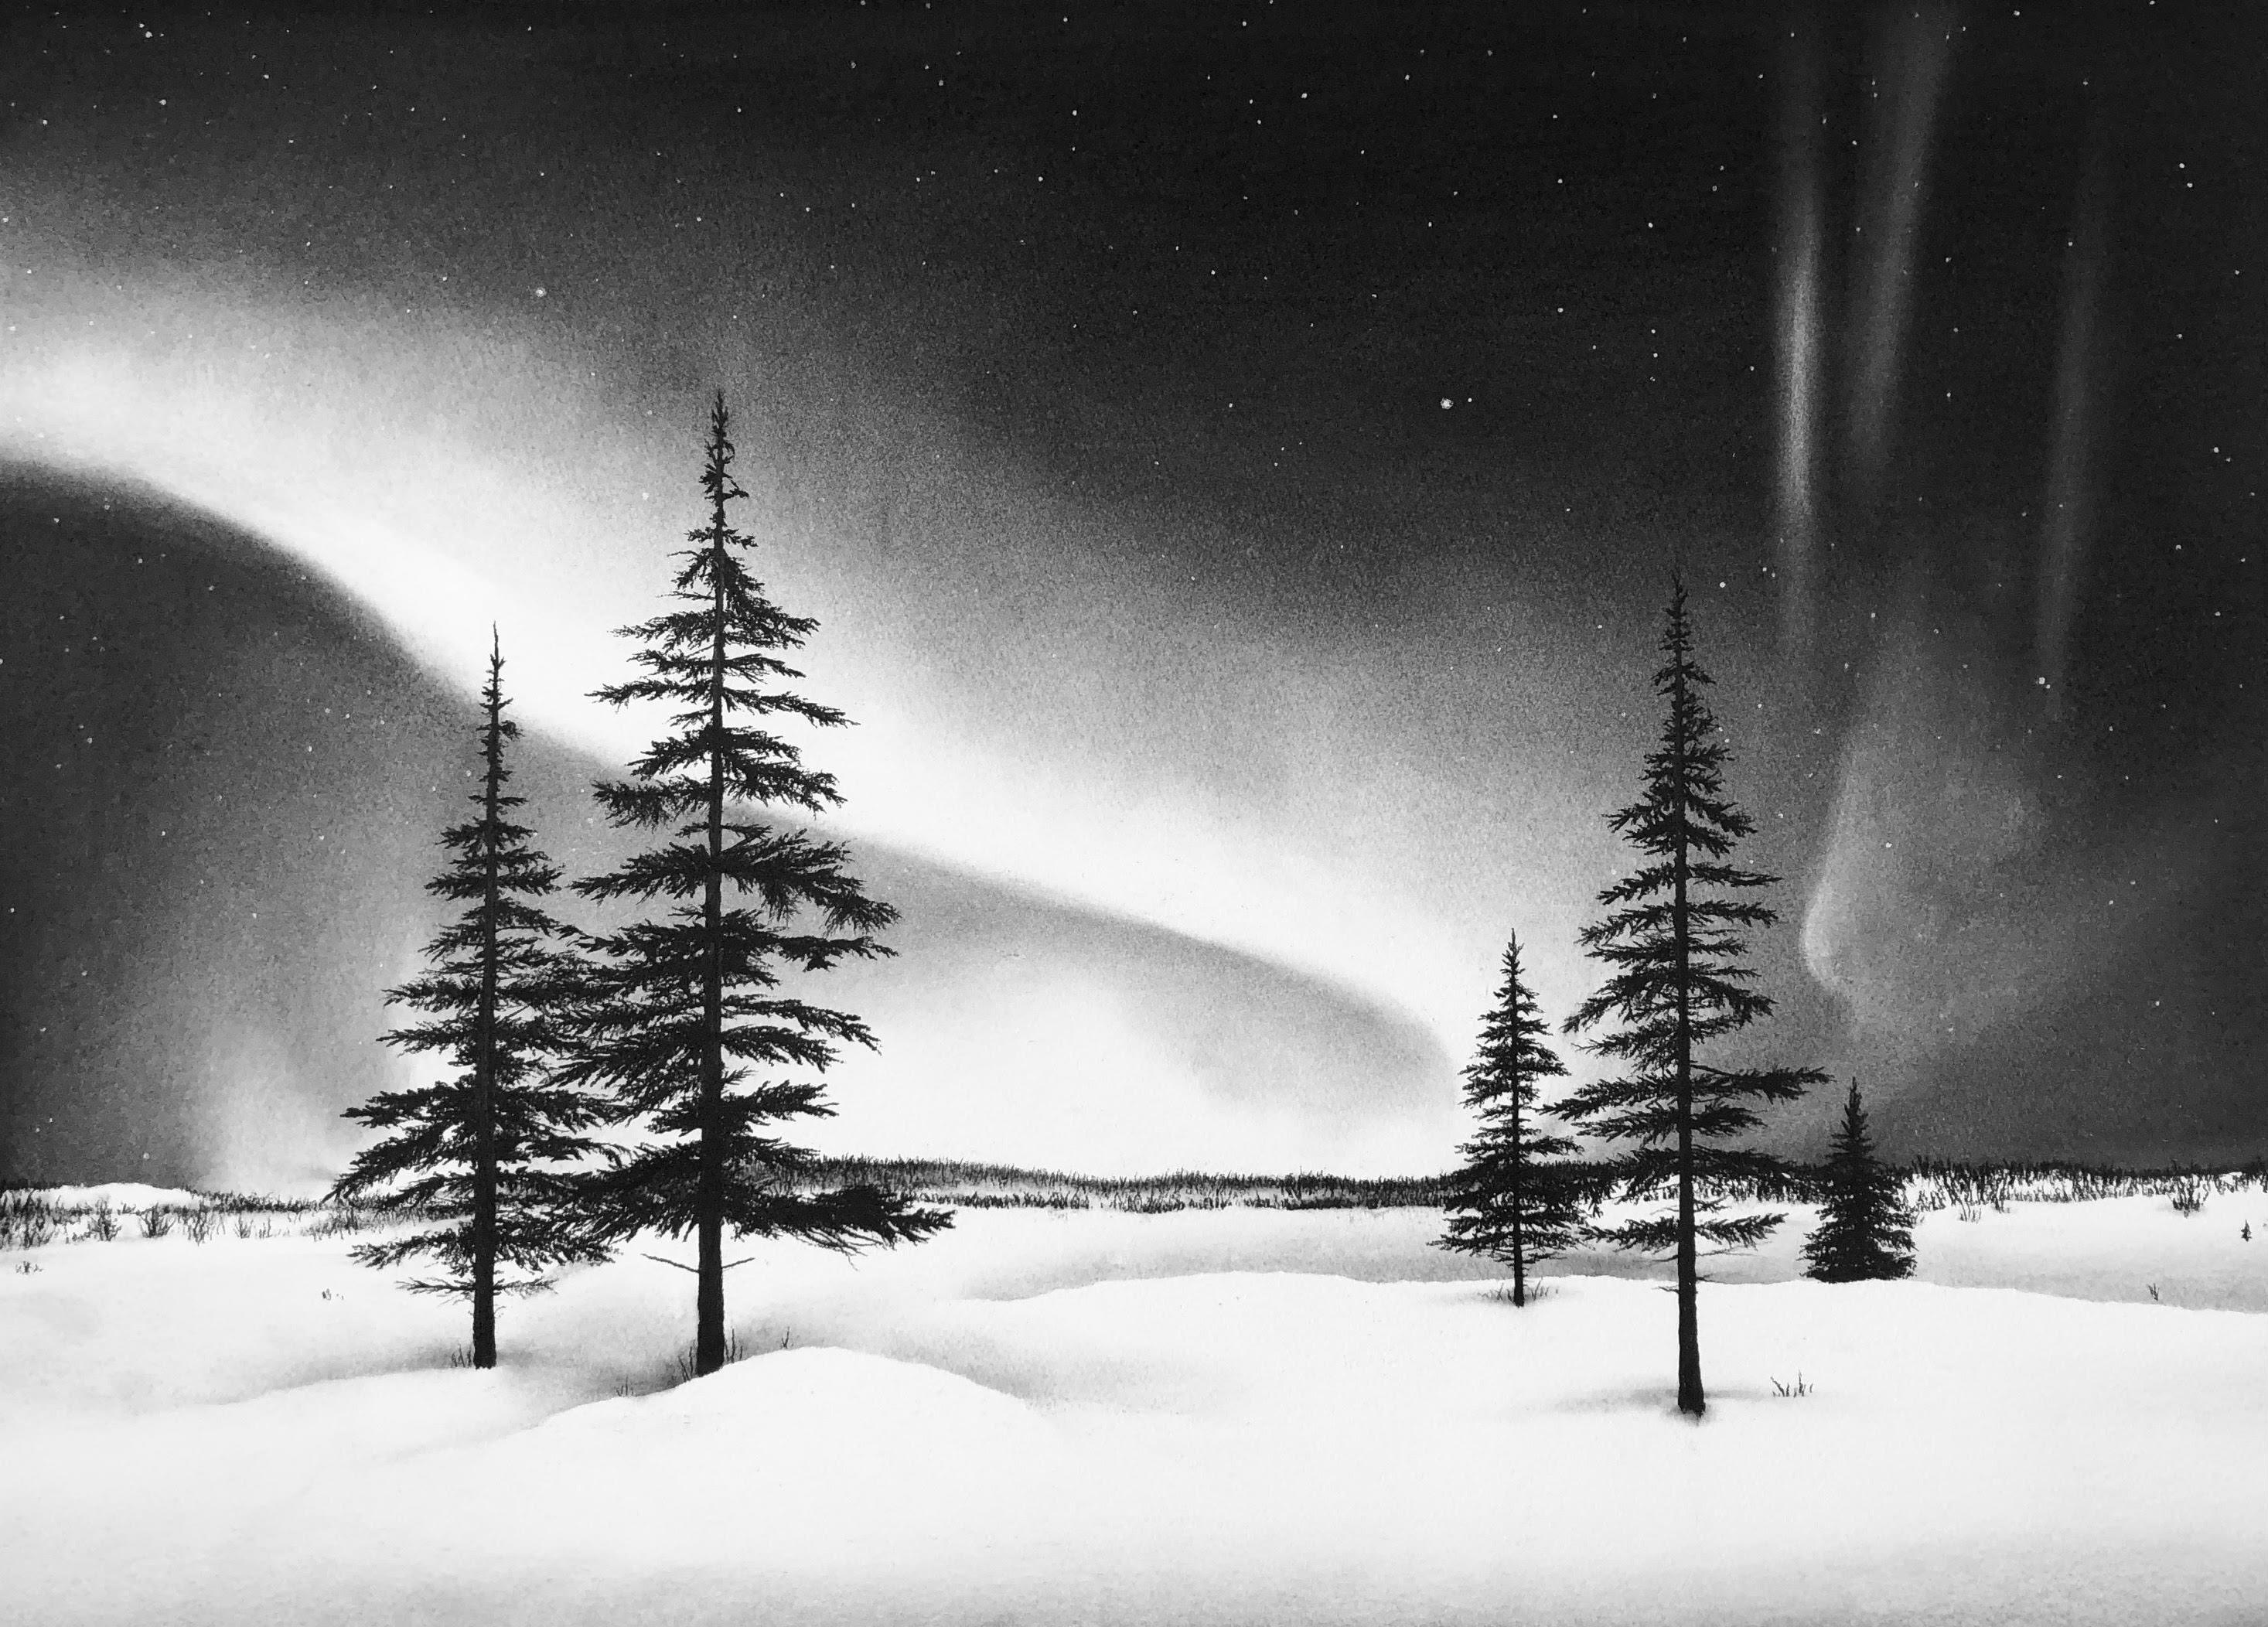 Katherine Curci Landscape Art - Dancing Lights, black and white charcoal drawing of aurora borealis in winter